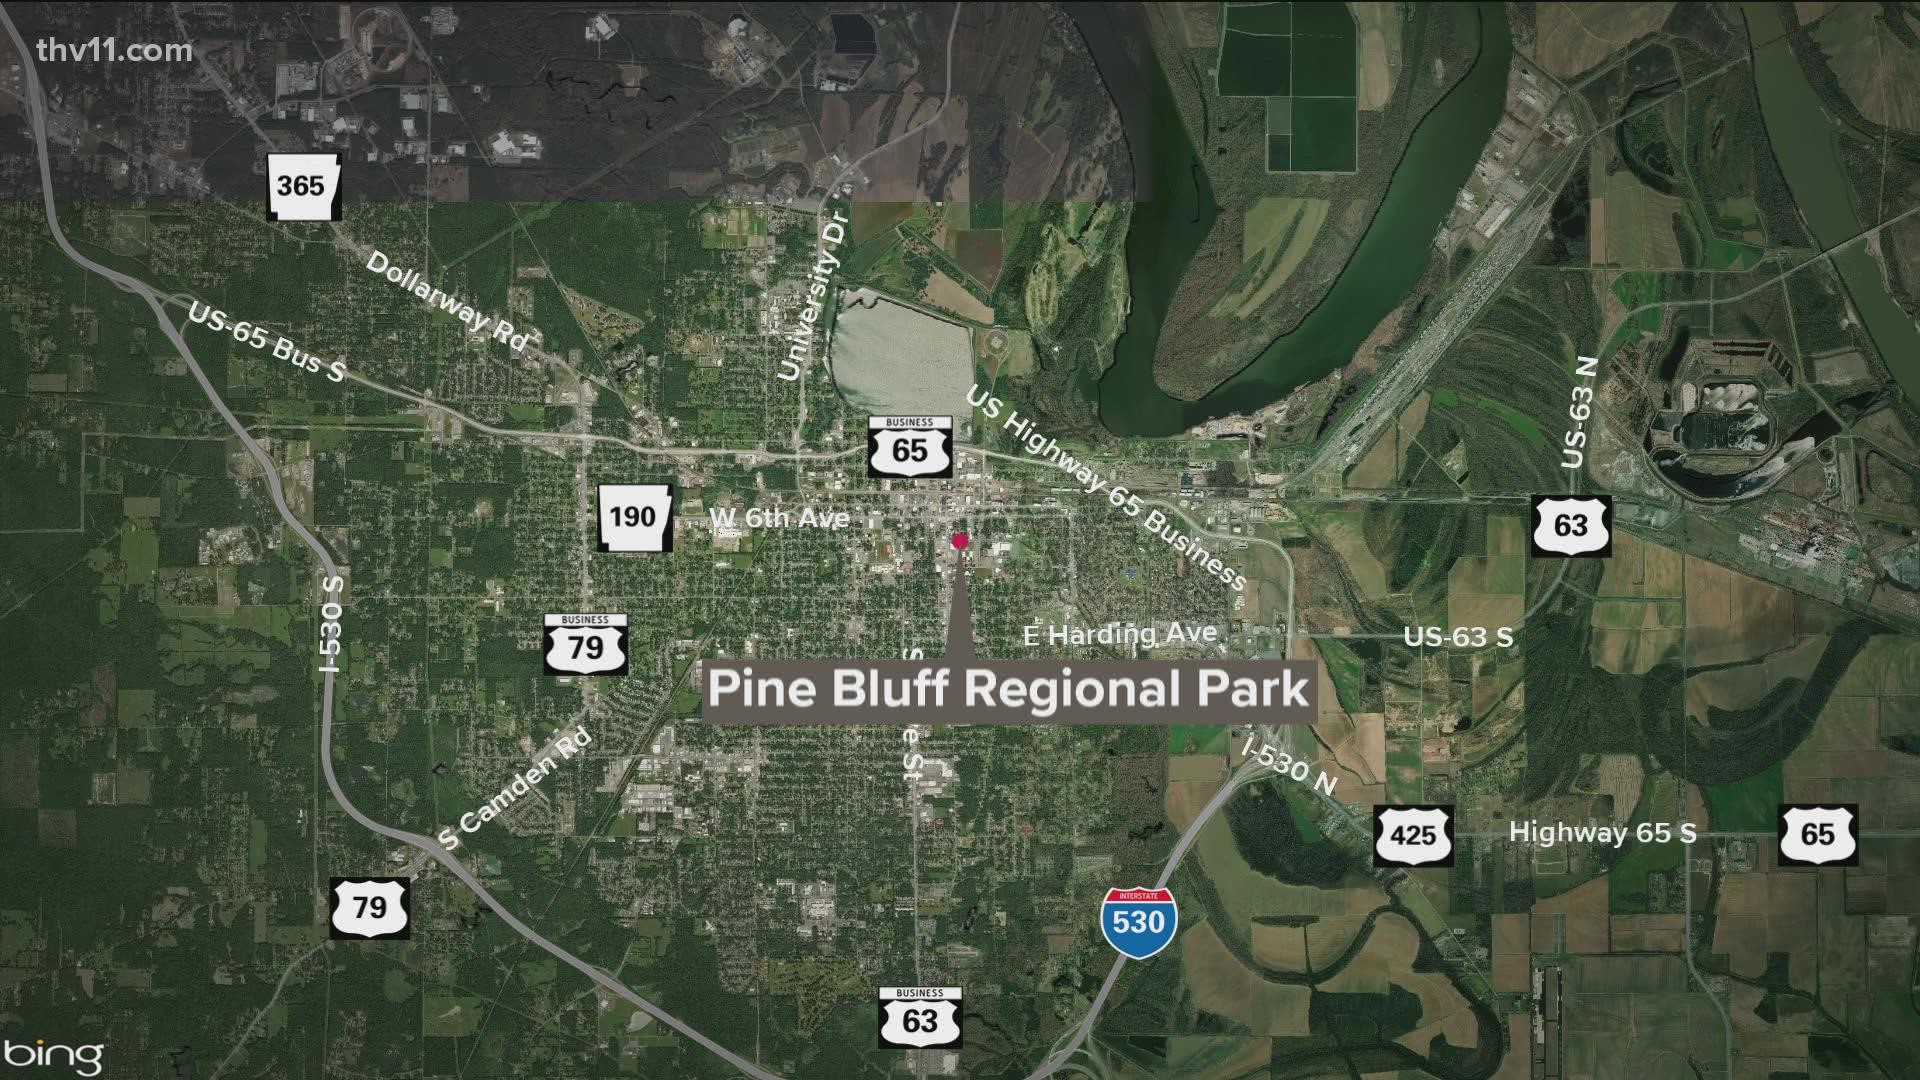 Pine Bluff police are investigating a shooting that left an 18-year-old dead, an 11-year-old injured, and 2 others injured at Regional Park.